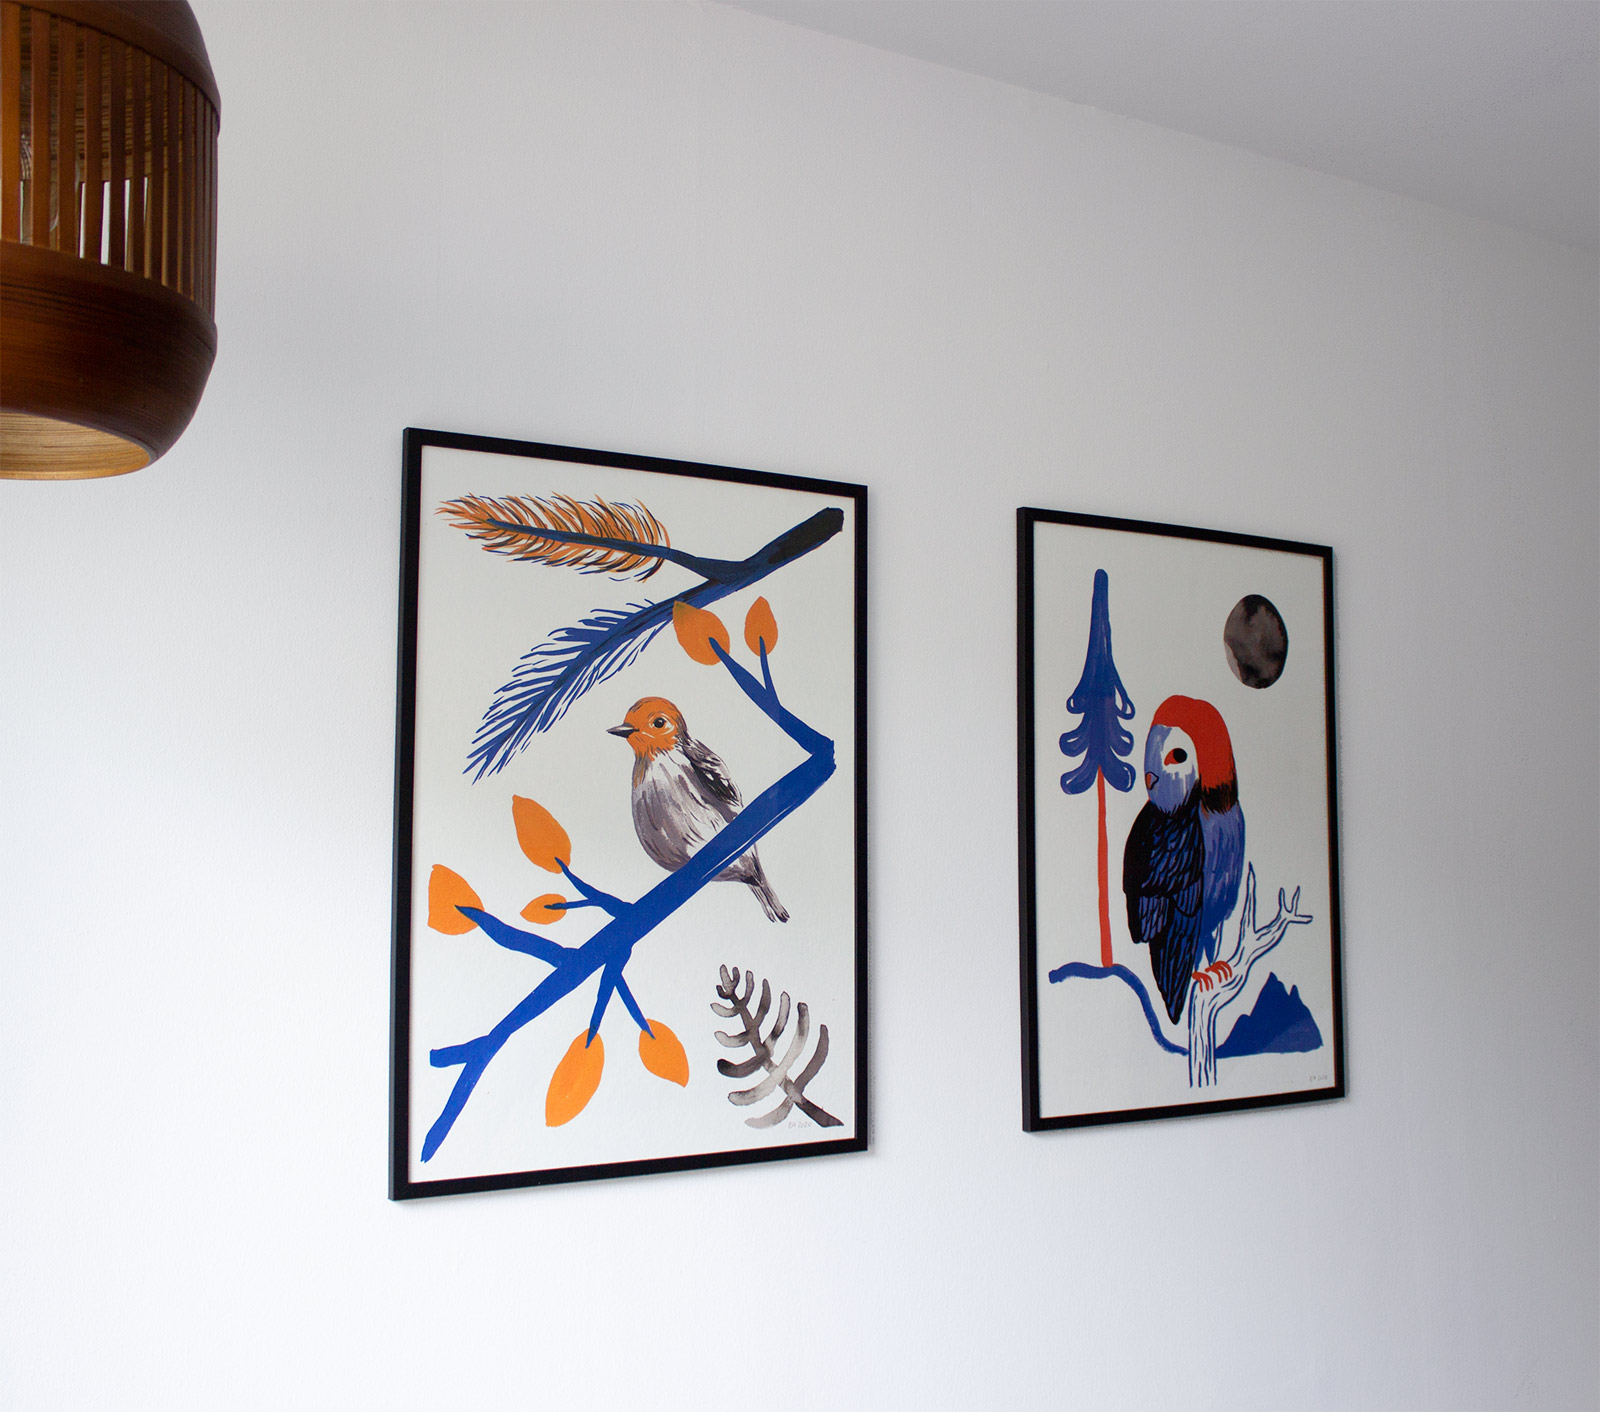 giclee-print, aesthetic, family-friendly, figurative, illustrative, animals, botany, nature, blue, orange, ink, paper, beautiful, birds, contemporary-art, cute, danish, decorative, design, interior, interior-design, modern, modern-art, nordic, pretty, scandinavien, trees, Buy original high quality art. Paintings, drawings, limited edition prints & posters by talented artists.